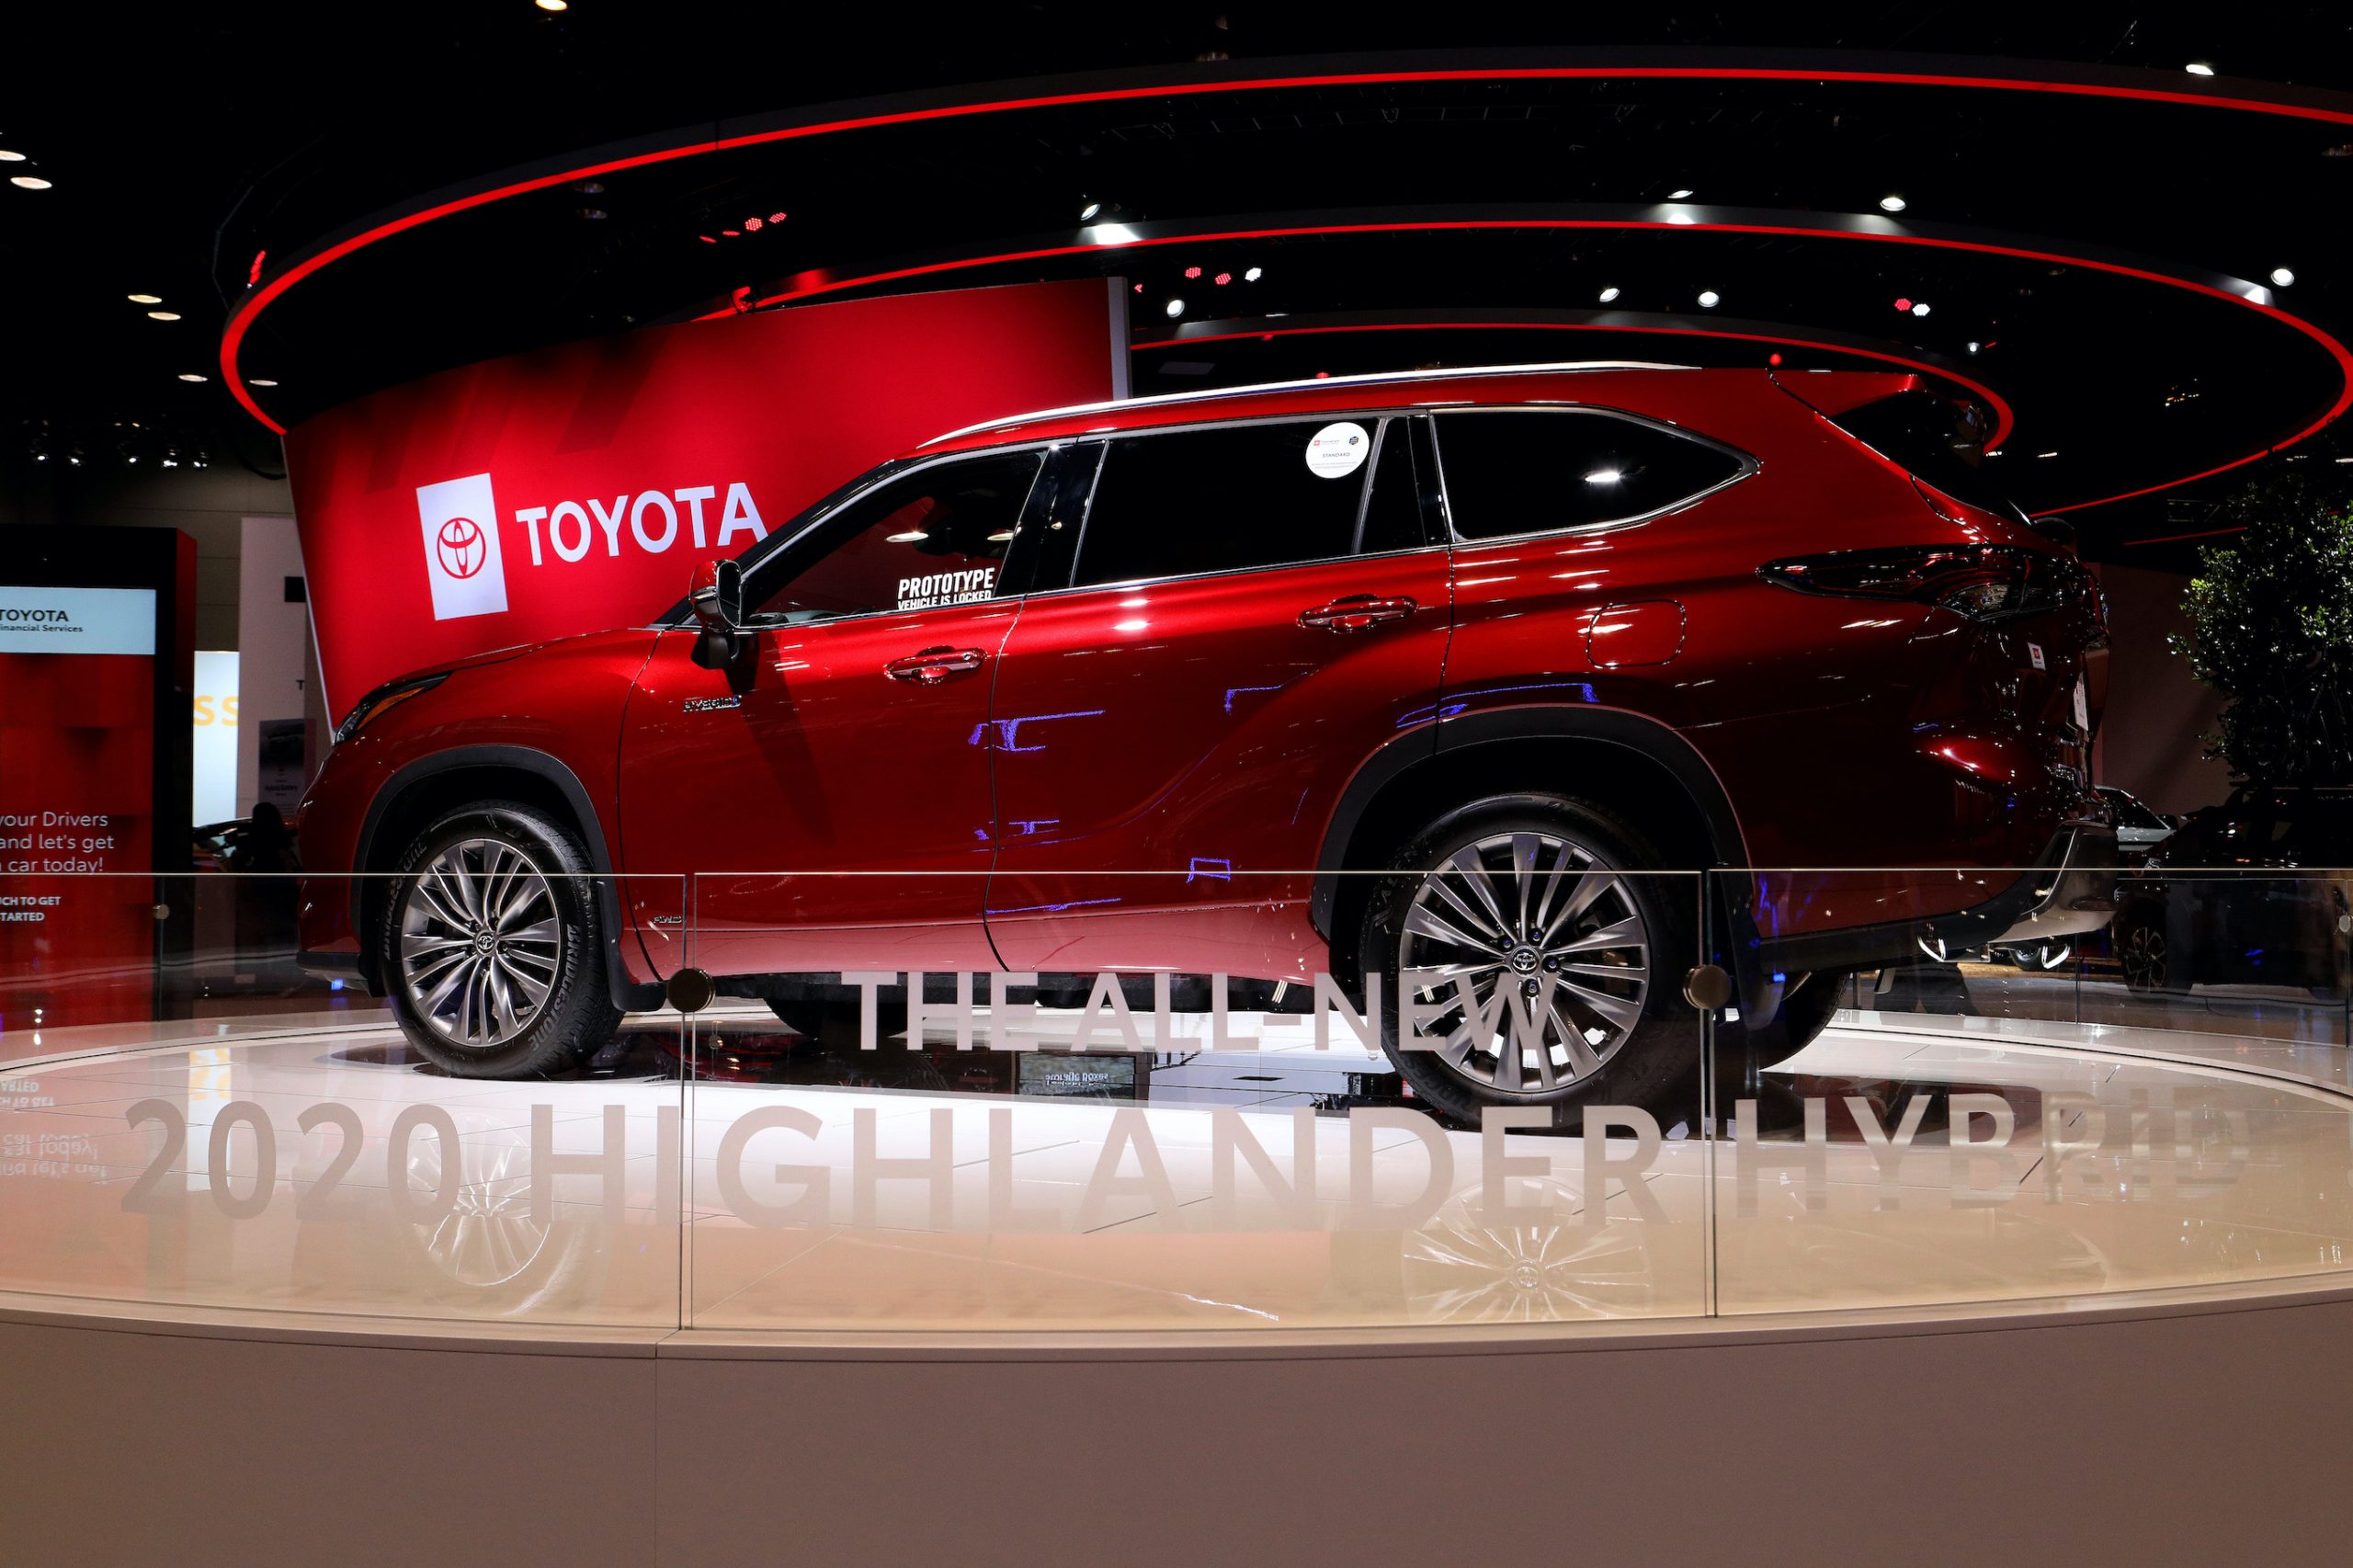 2020 Toyota Highlander Hybrid is on display at the 112th Annual Chicago Auto Show